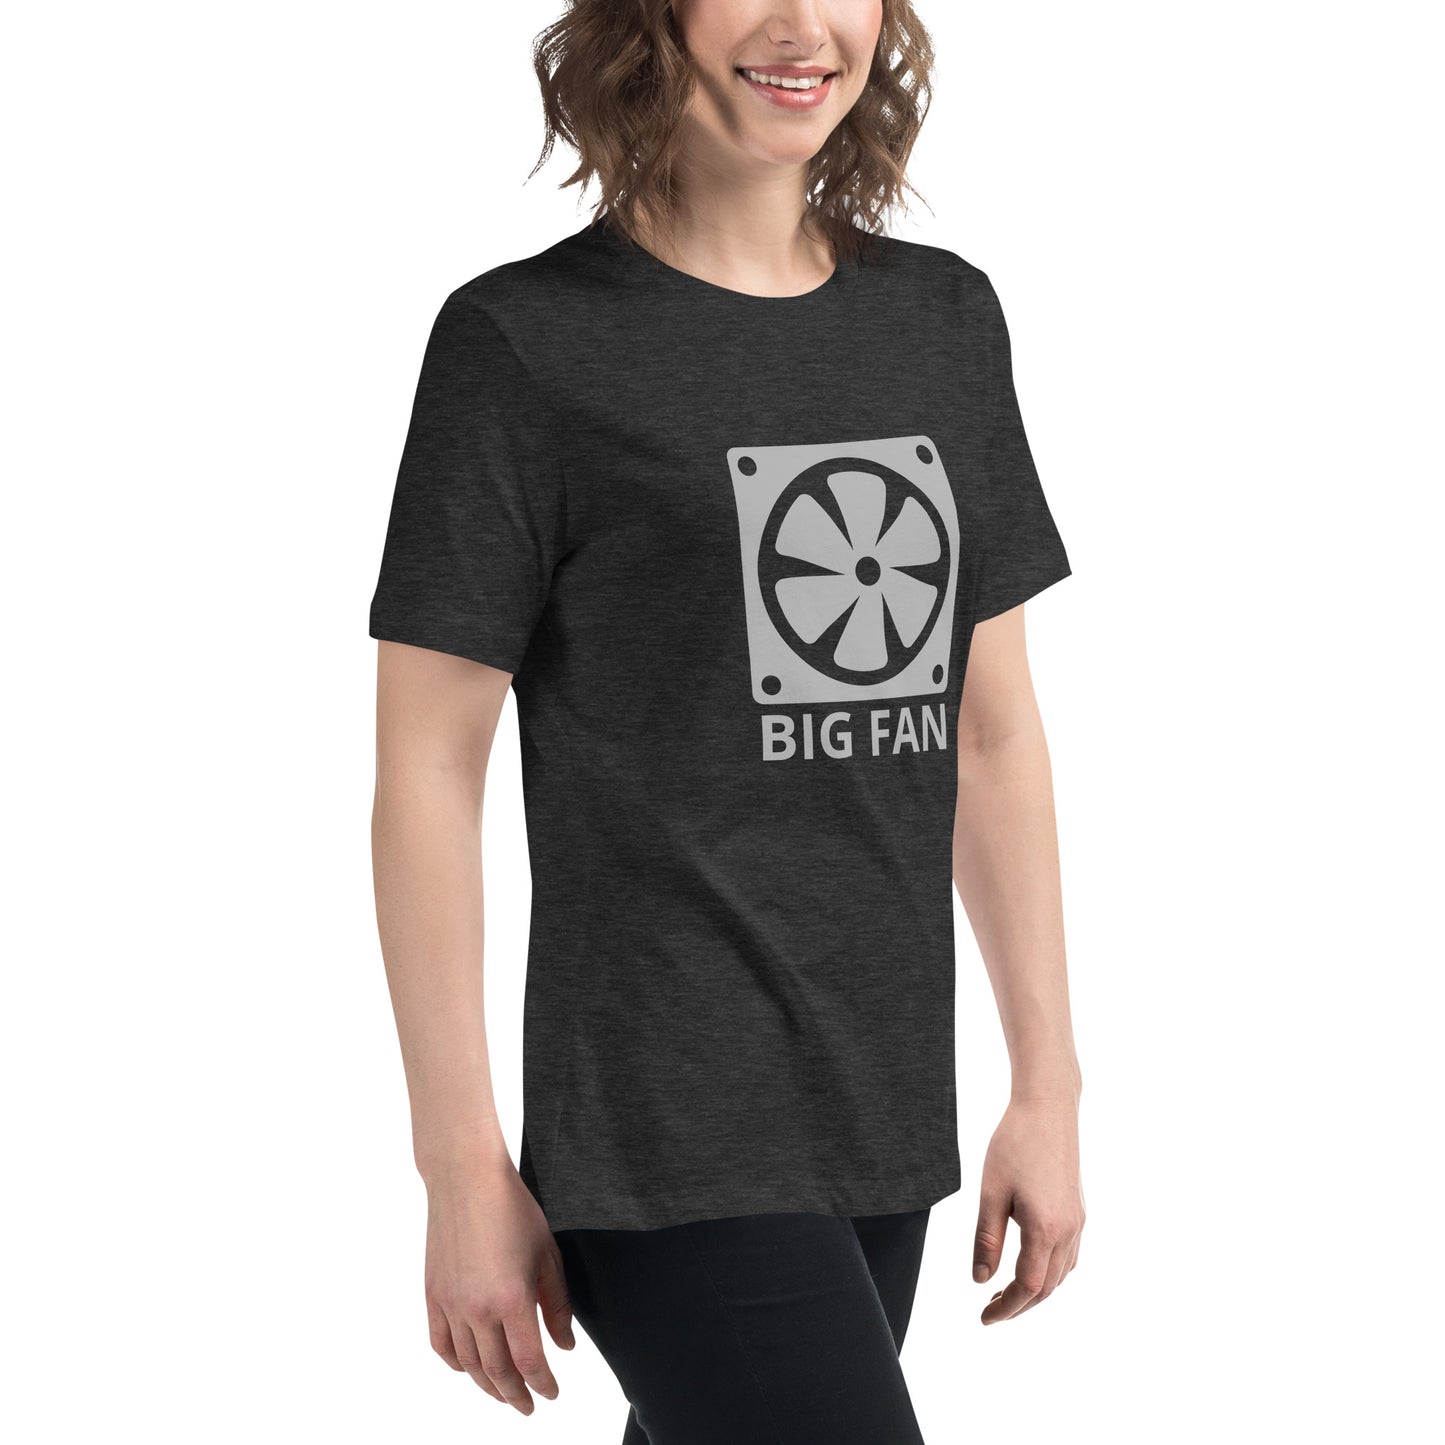 Women with dark grey t-shirt with image of a big computer fan and the text "BIG FAN"